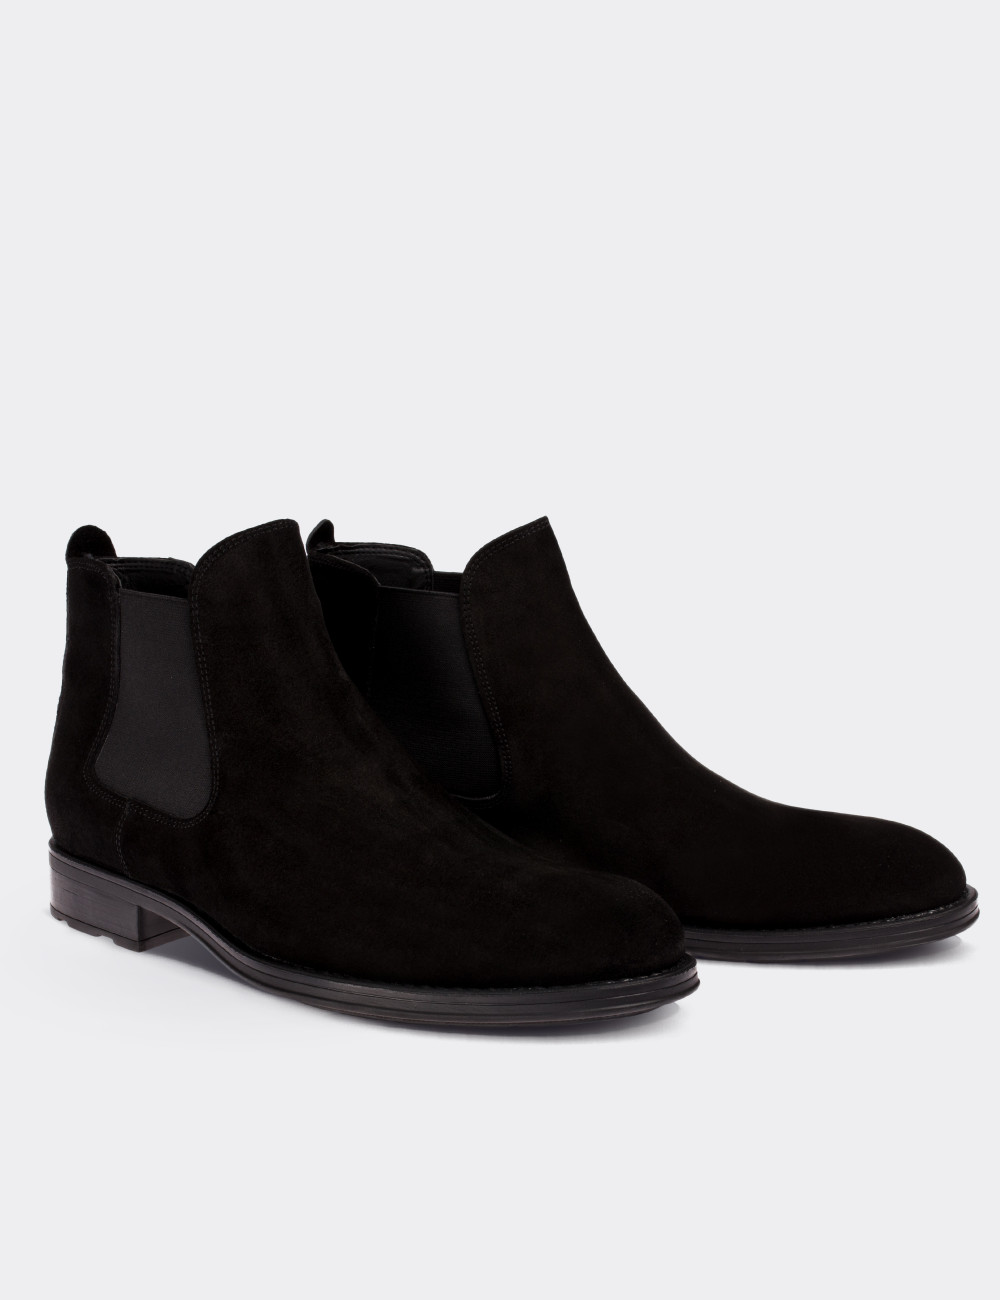 Black Suede Leather Chelsea Boots - 01620MSYHC10